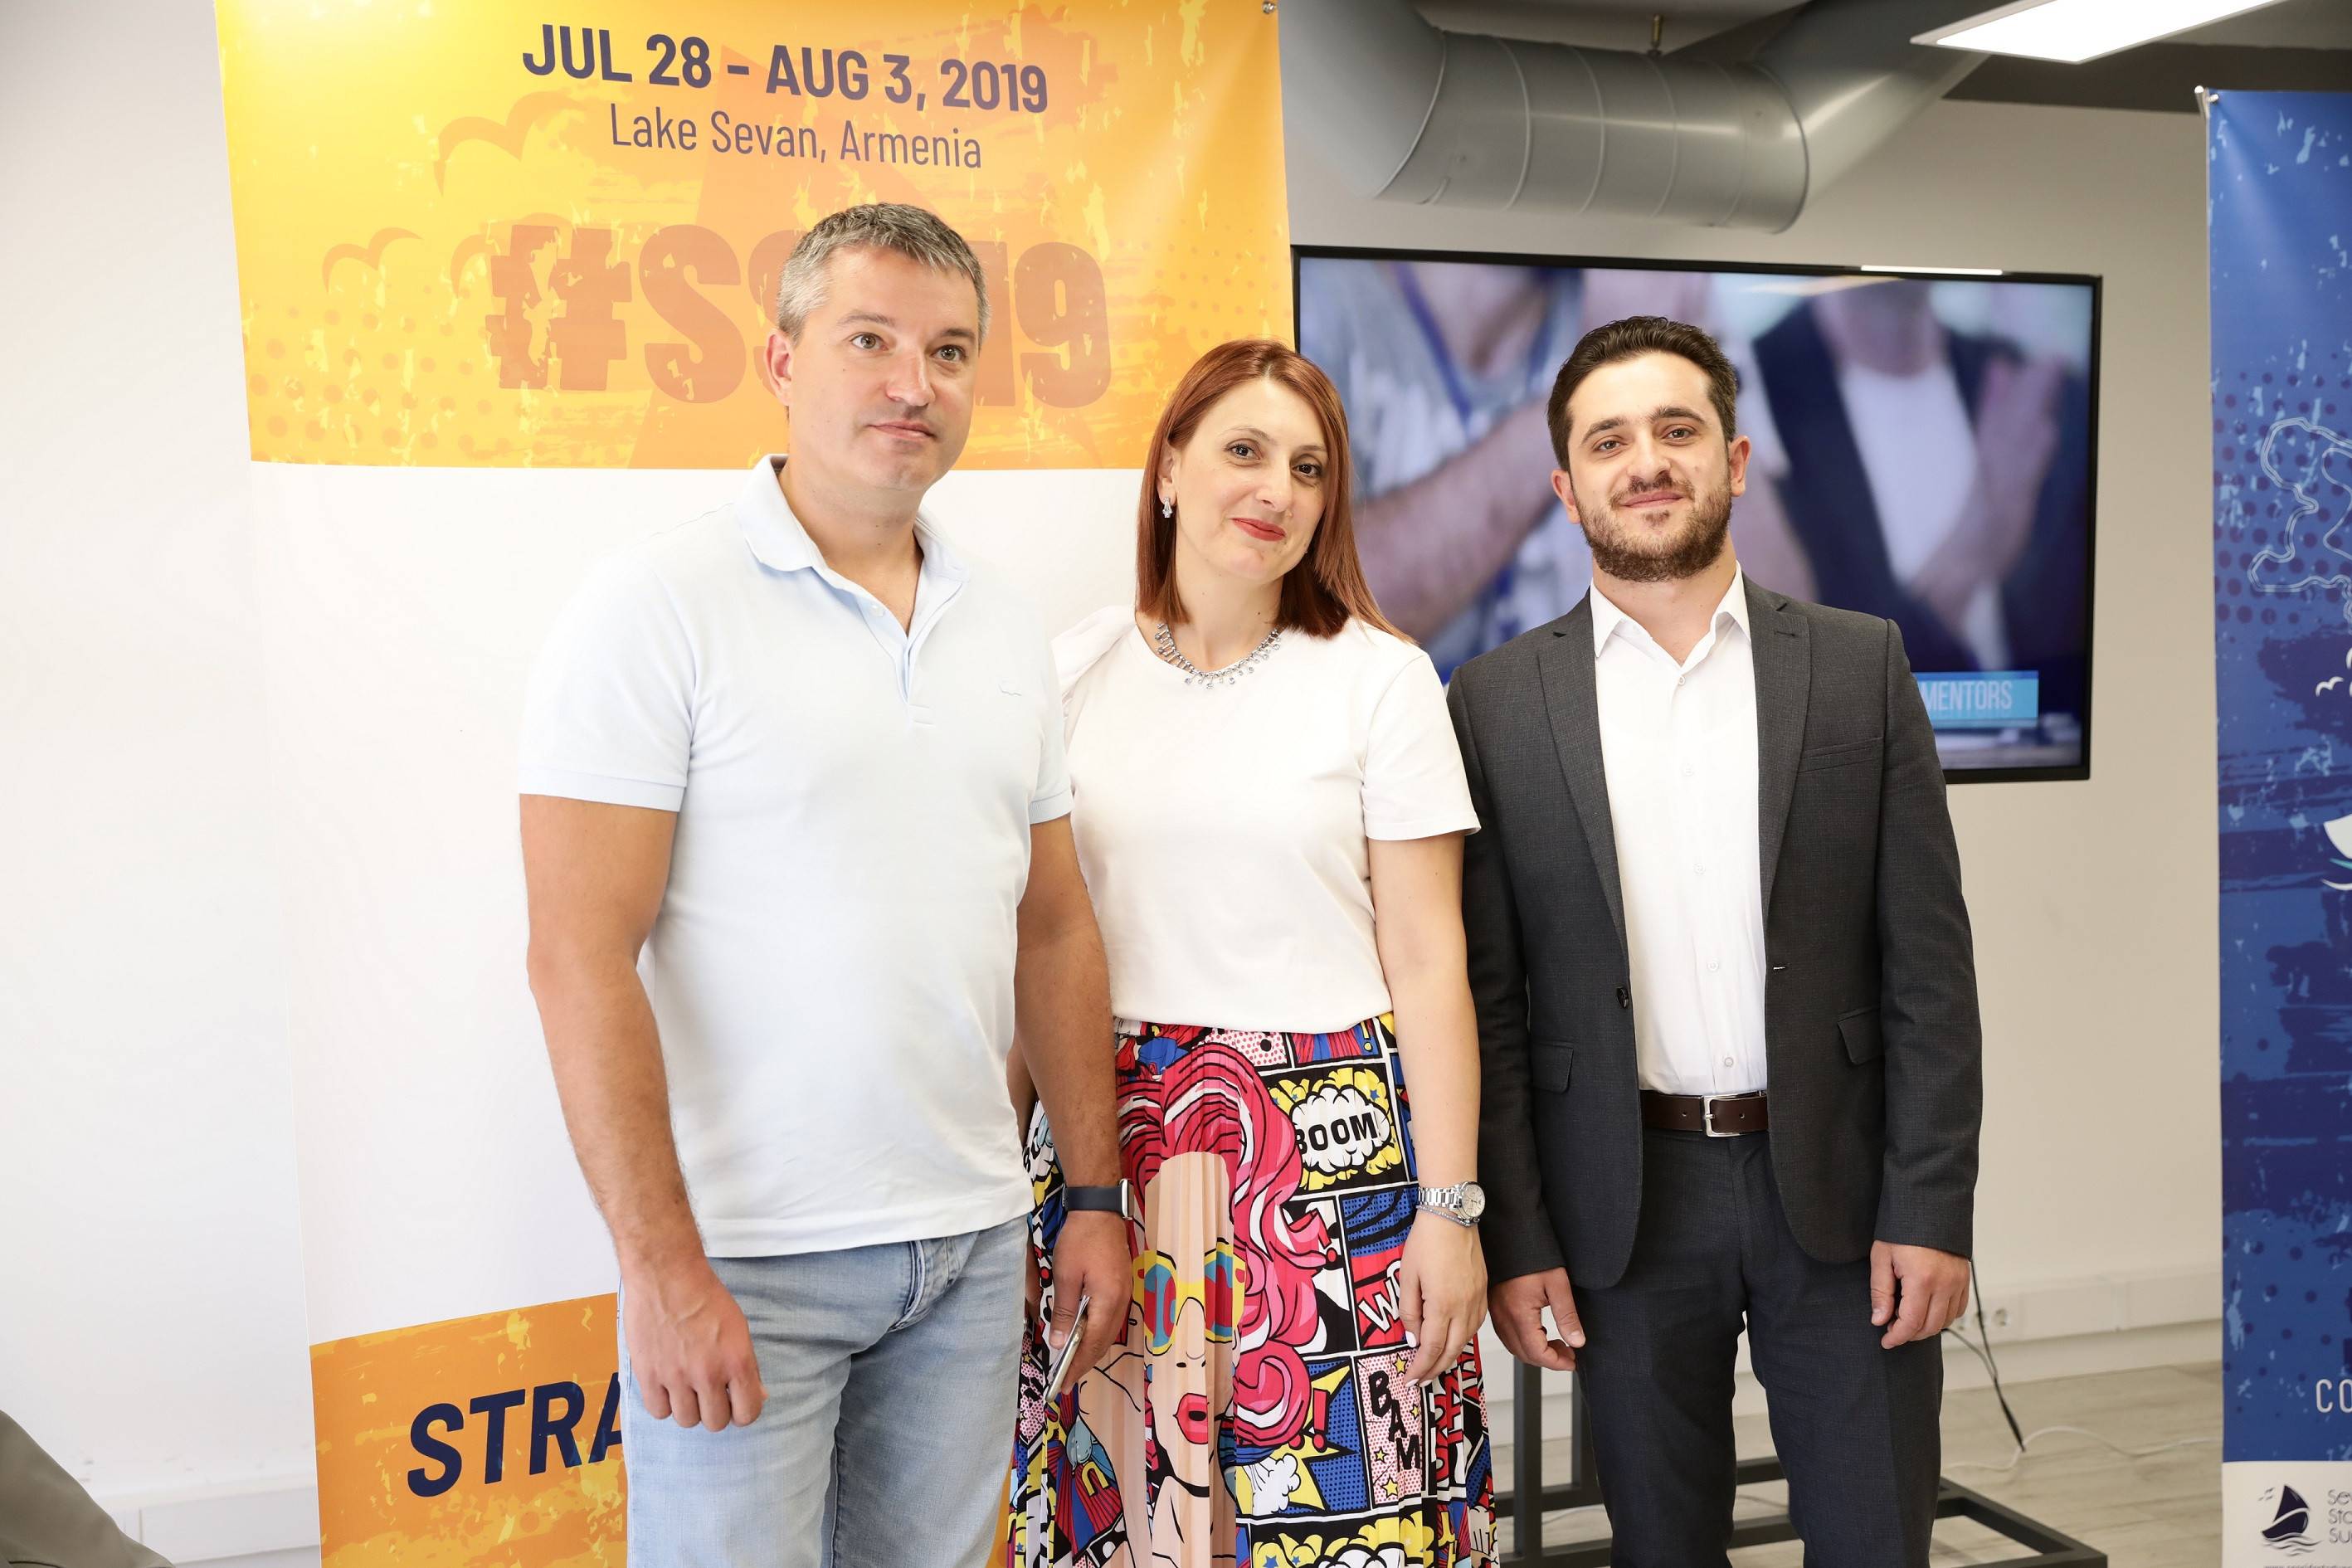 “Sevan Startup Summit 2019” to take place with support of Beeline